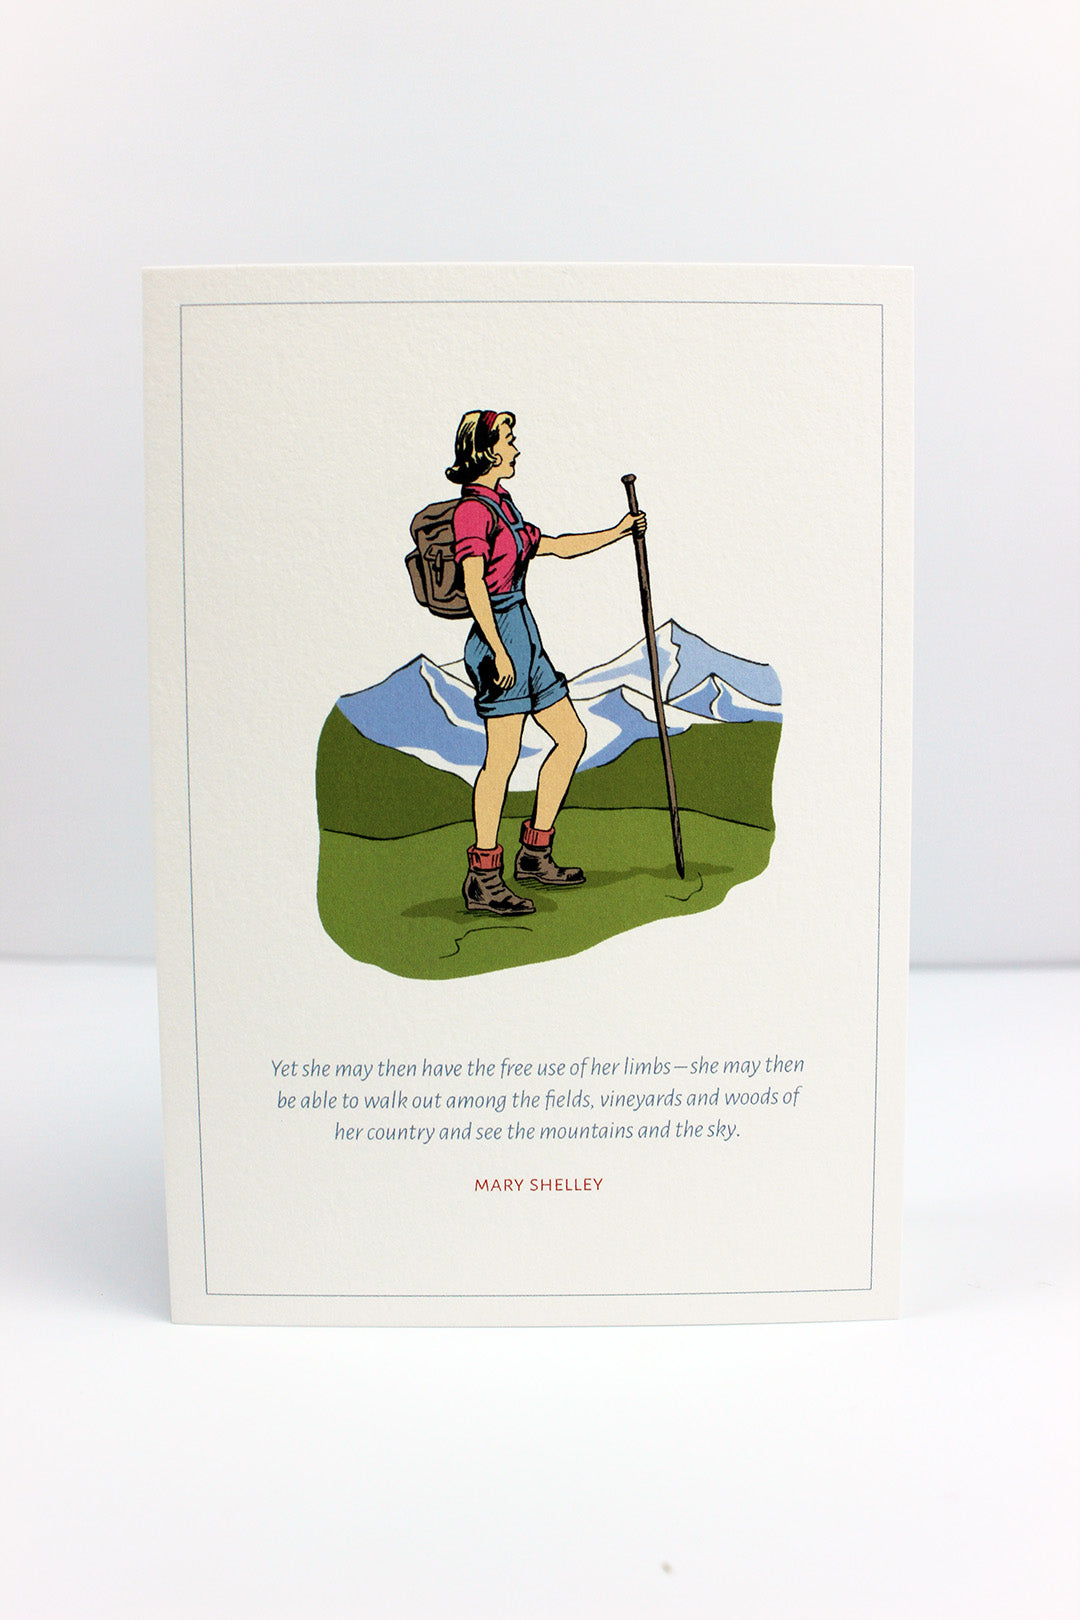 greetings card which features a quote from Mary Shelley